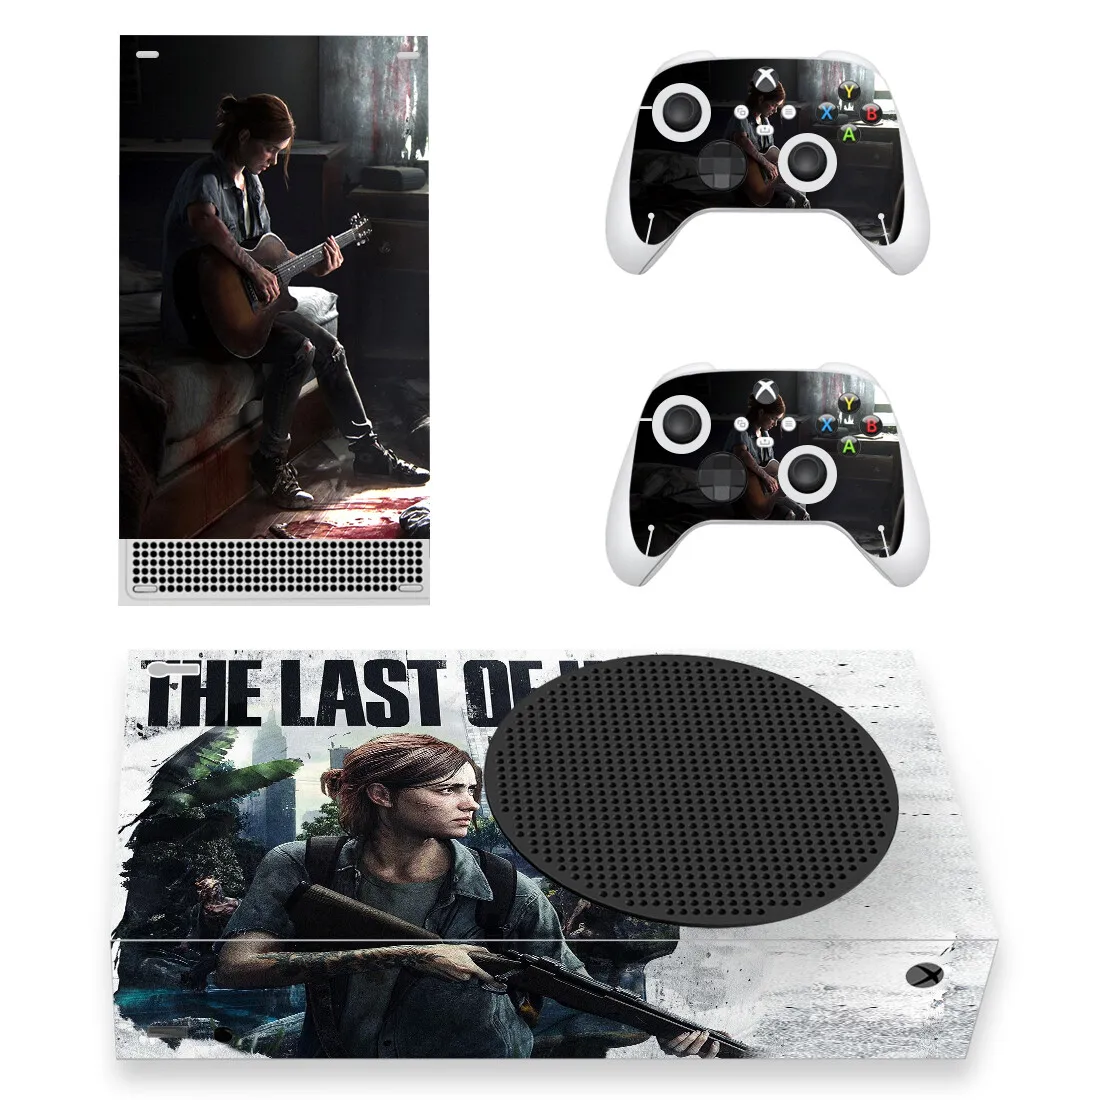 

The Last Of Us Style Xbox Series S Skin Sticker for Console & 2 Controllers Decal Vinyl Protective Skins Style 1